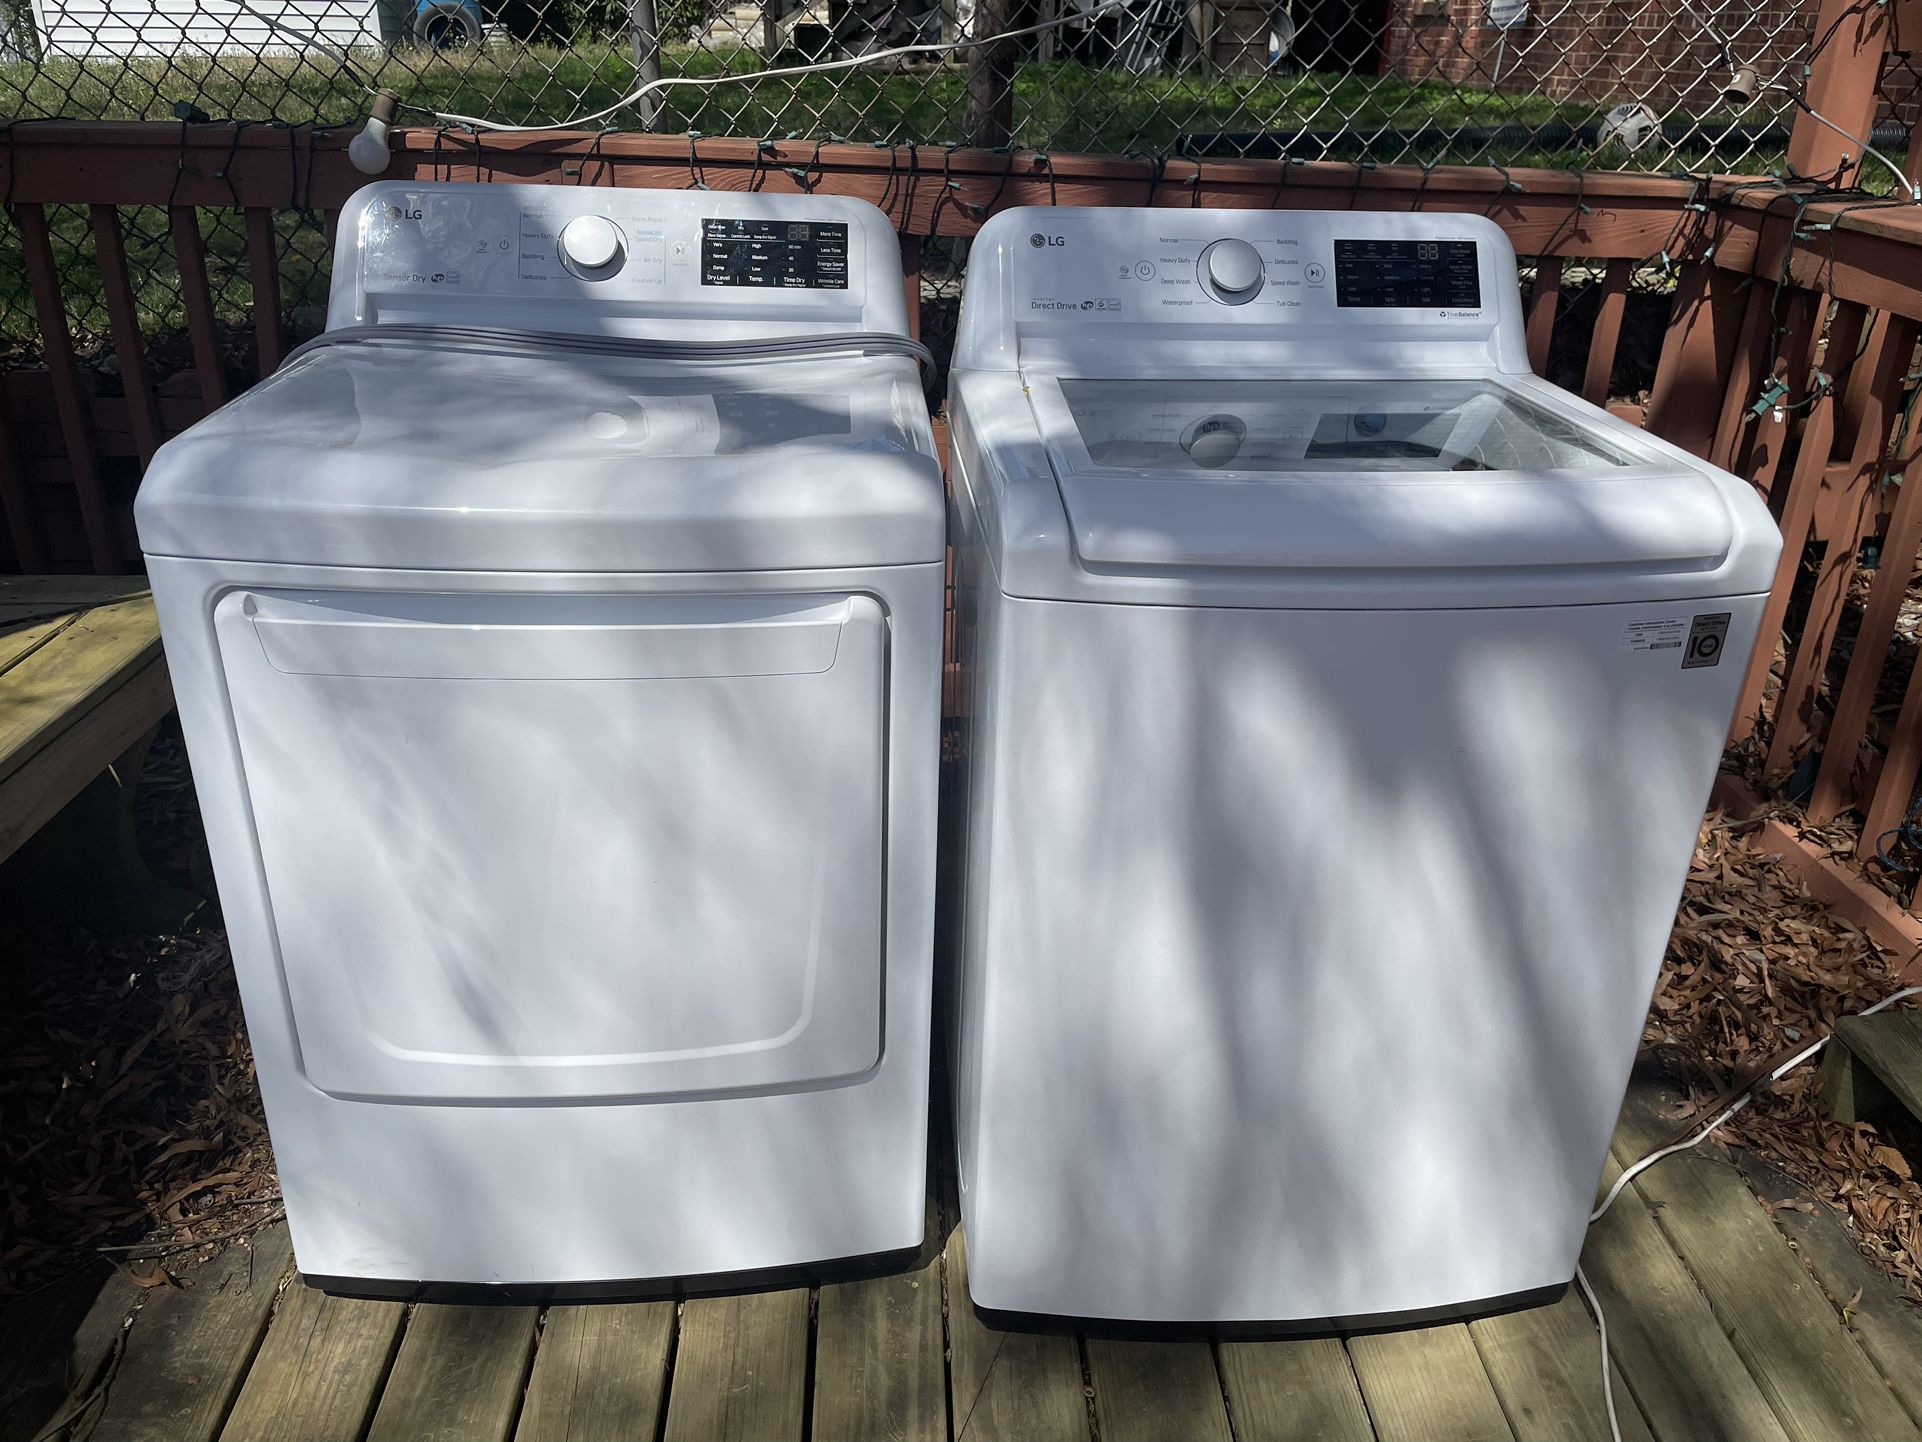 LG Dryer And Washer Set